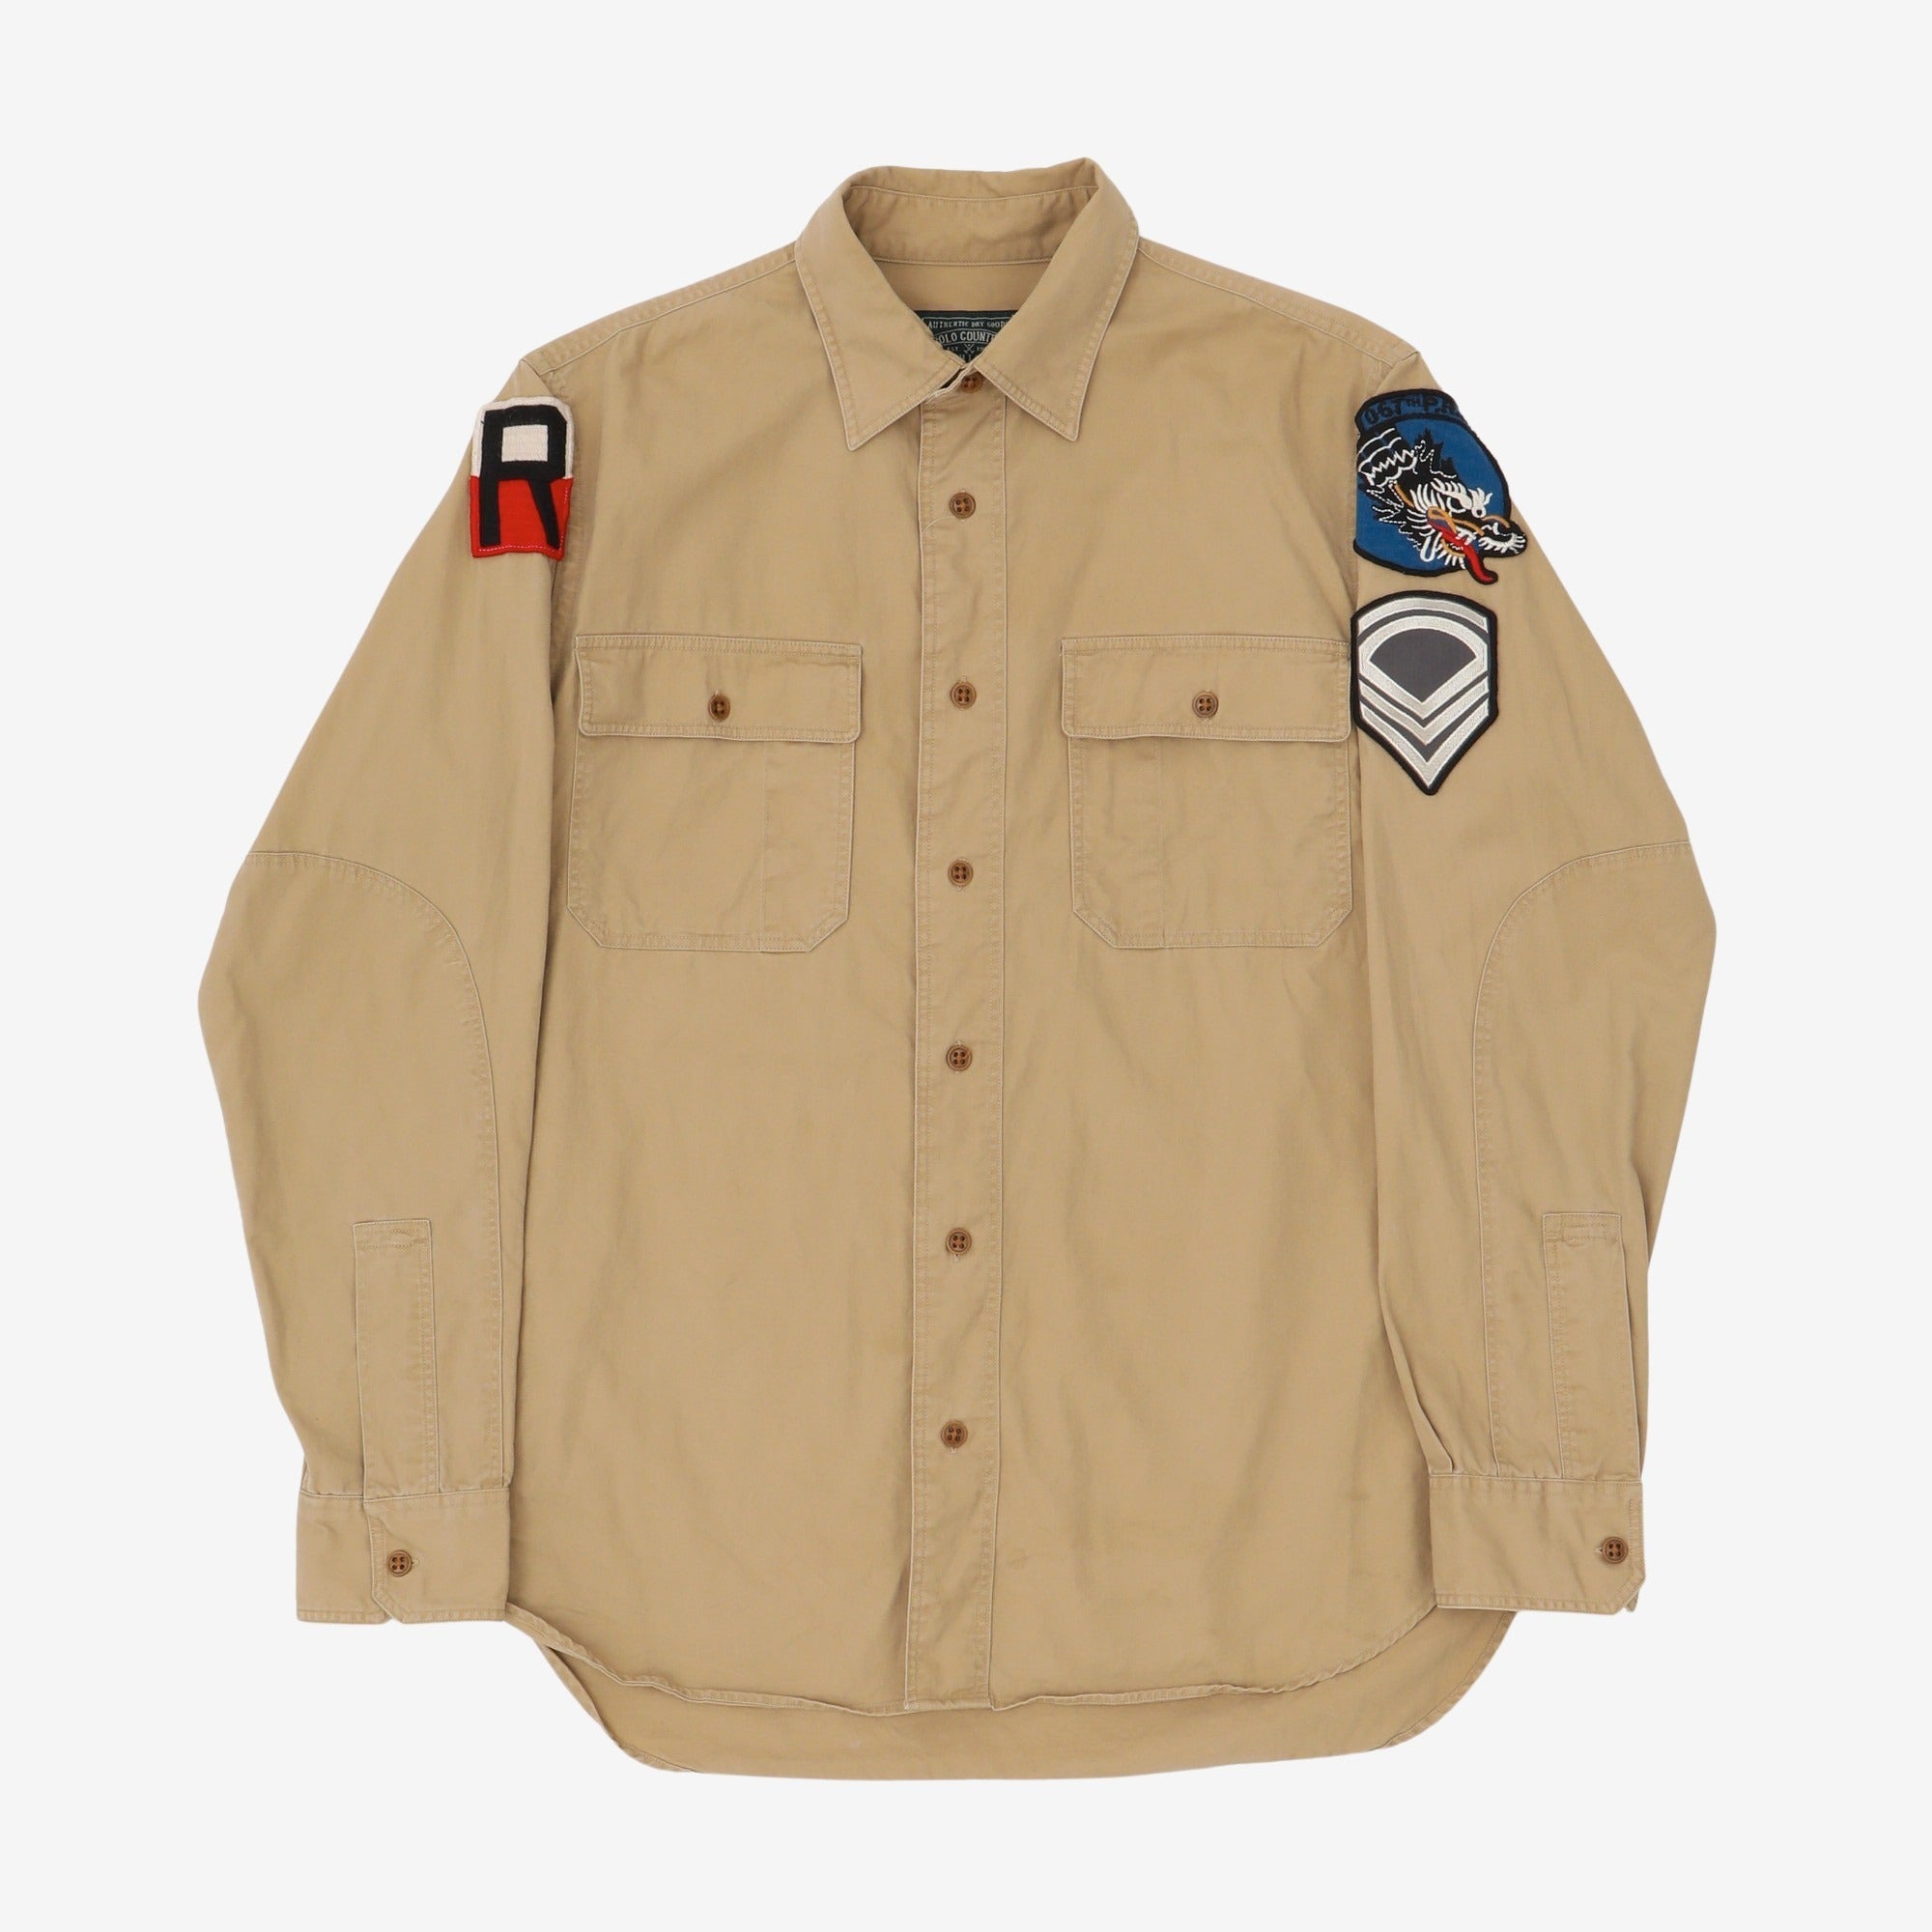 Country Air Force Shirt